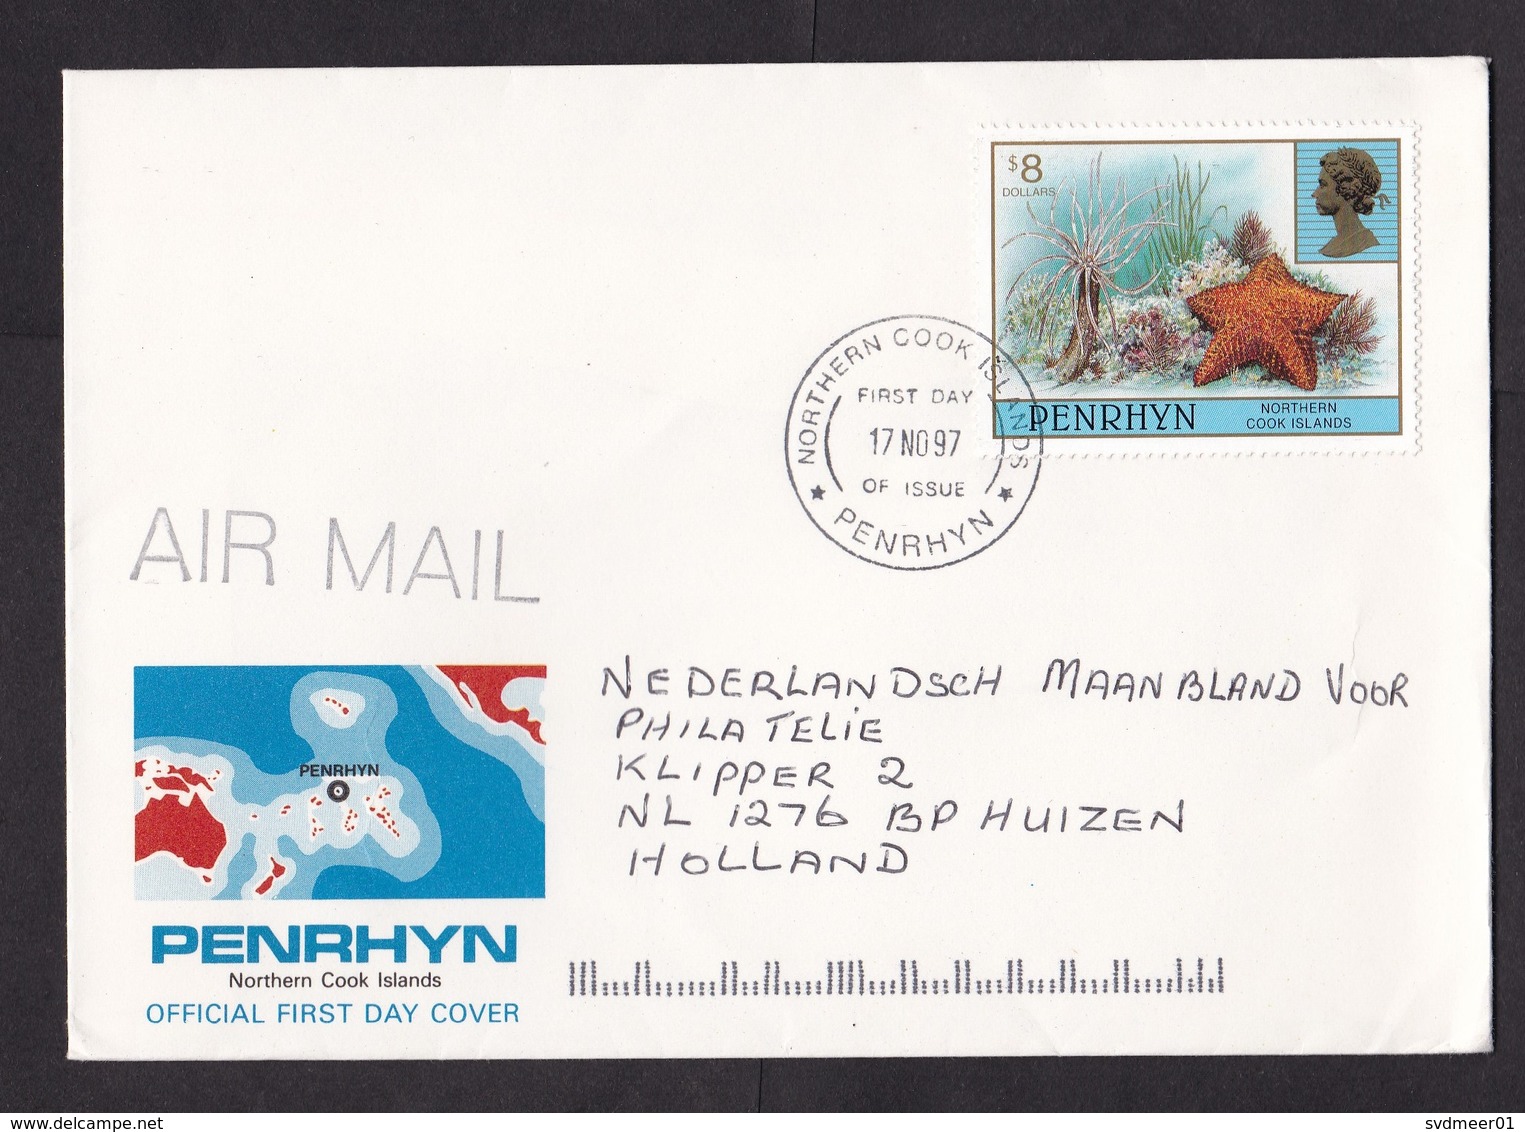 Penrhyn: FDC First Day Cover To Netherlands, 1997, 1 Stamp, Starfish, Sea Star, Underwater Life, $8 (traces Of Use) - Penrhyn